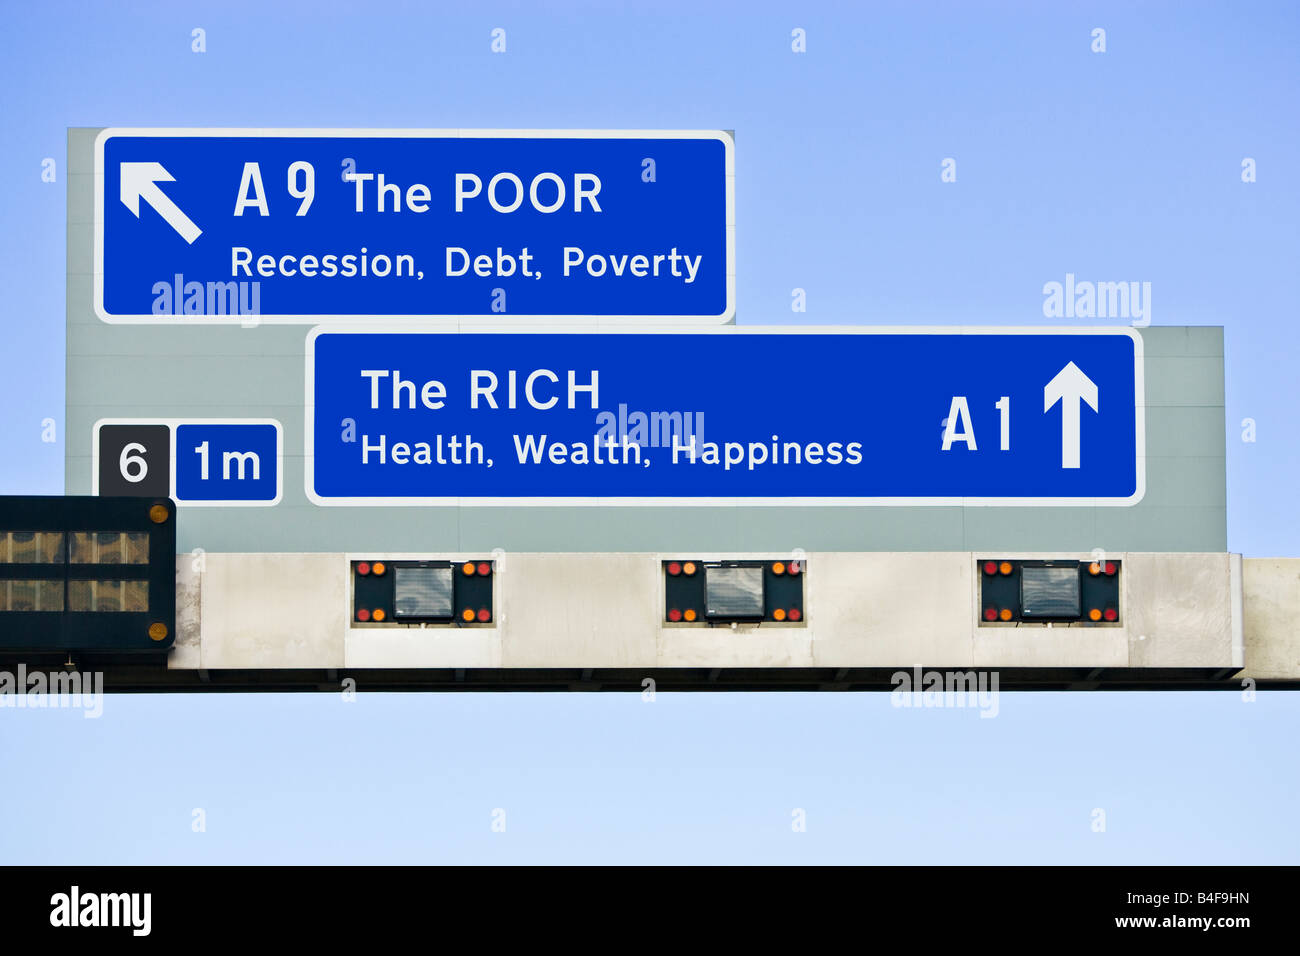 UK motorway sign financial concept economic differences between The Rich and The Poor / North / South England UK Stock Photo